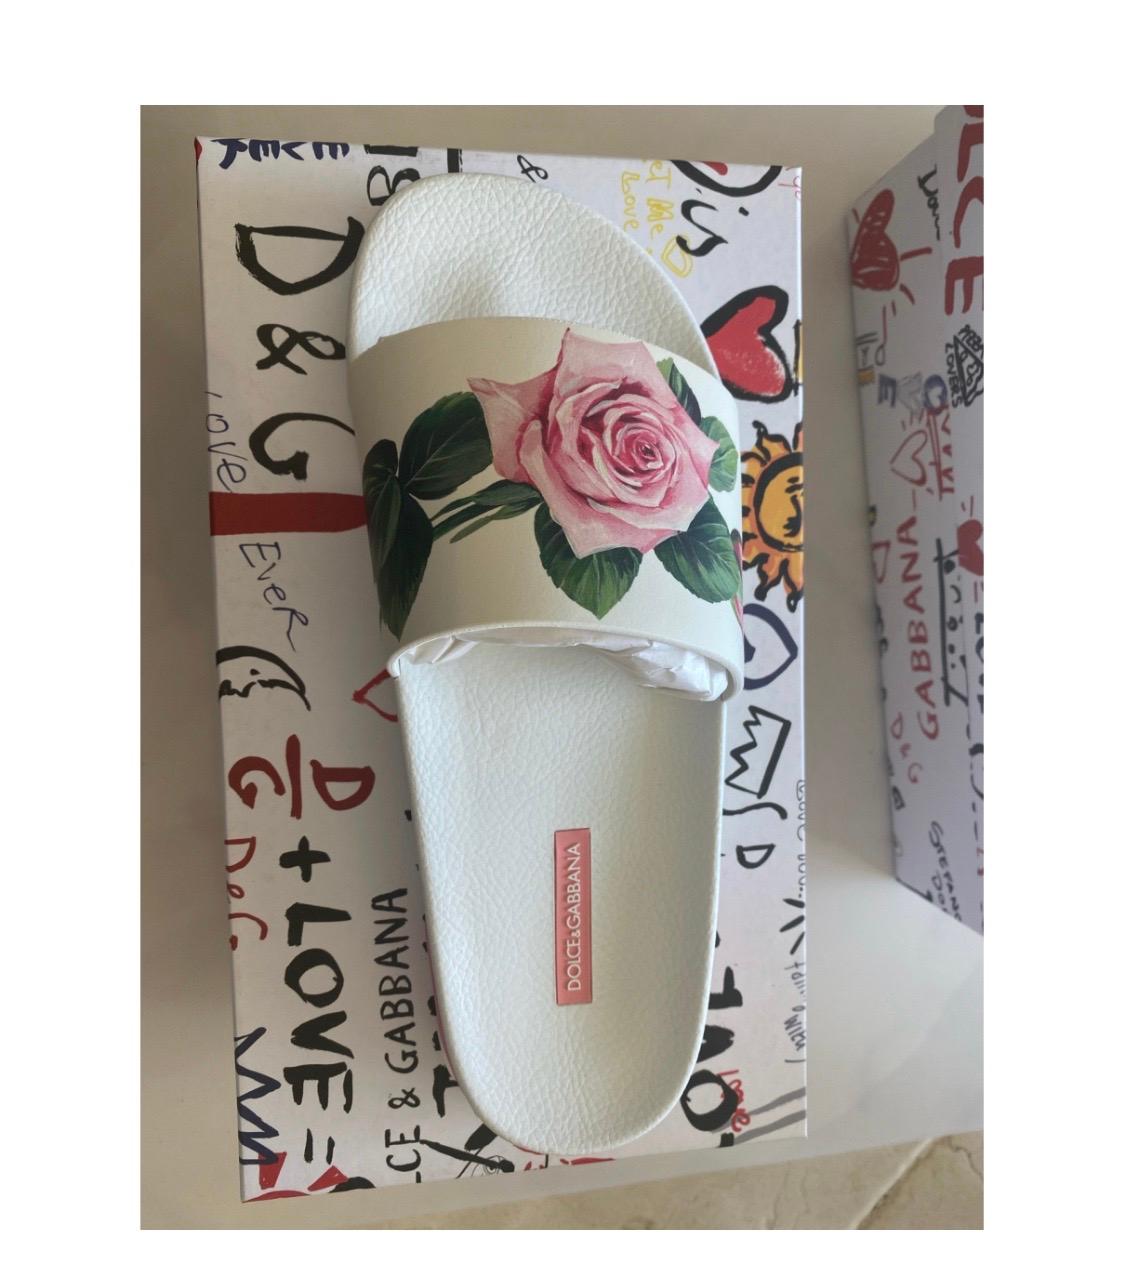 DOLCE & GABBANA
Tropical Rose Print Rubber Beachwear
Sliders In Floral Print
Size 39, UK6
100% Vitello, rubbery soles
Brand new with box!
Please check my other DG clothing &
accessories in this beautiful print!
